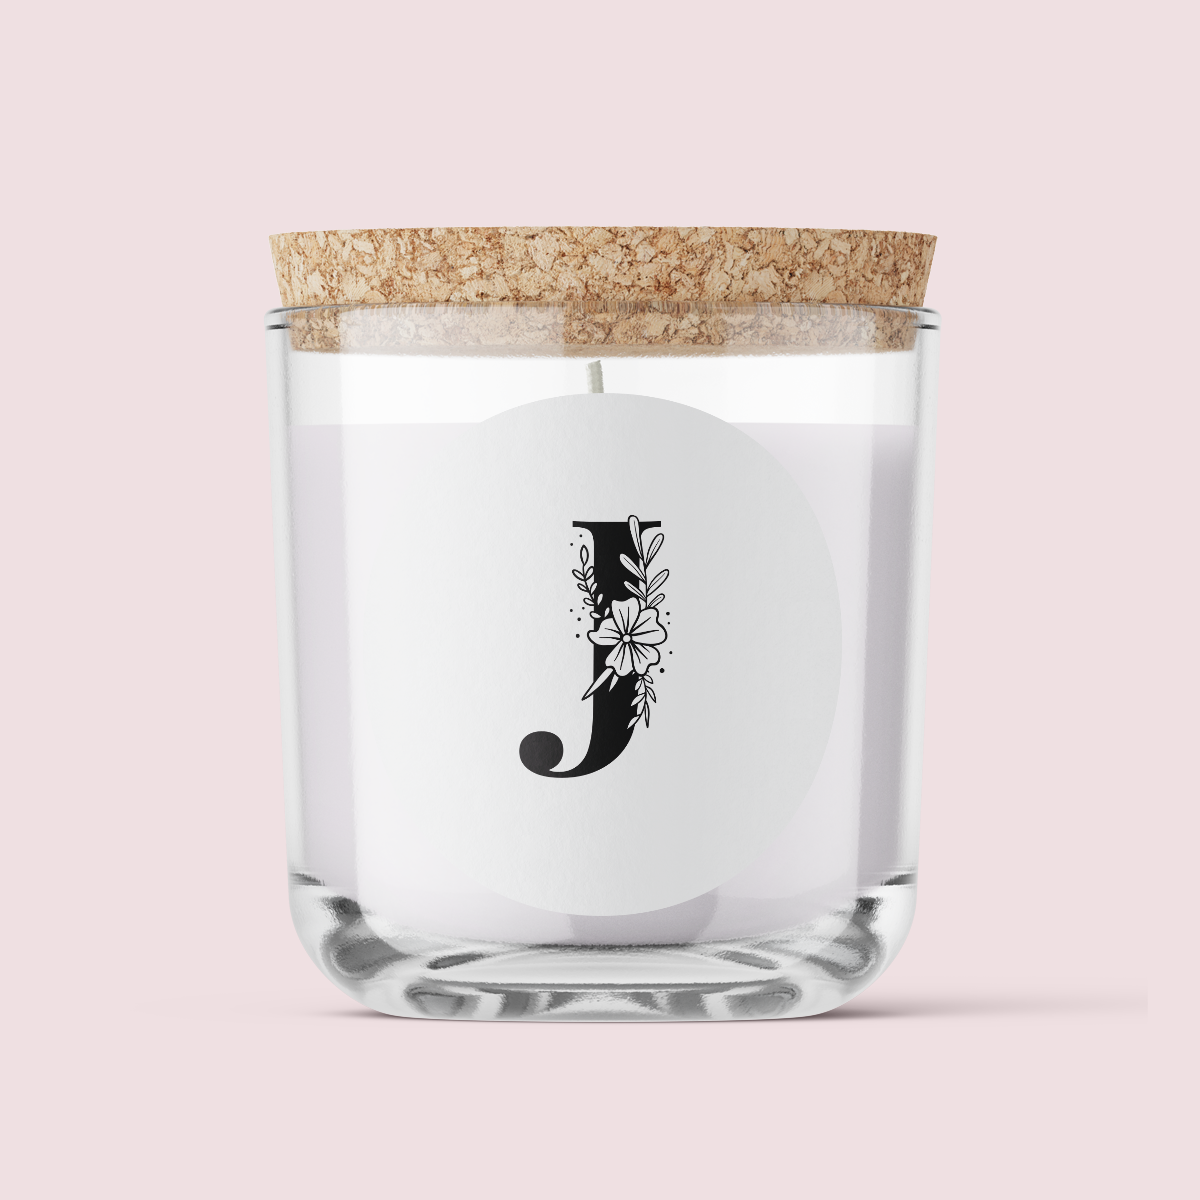 Floral Initials - Letter J - ROUND